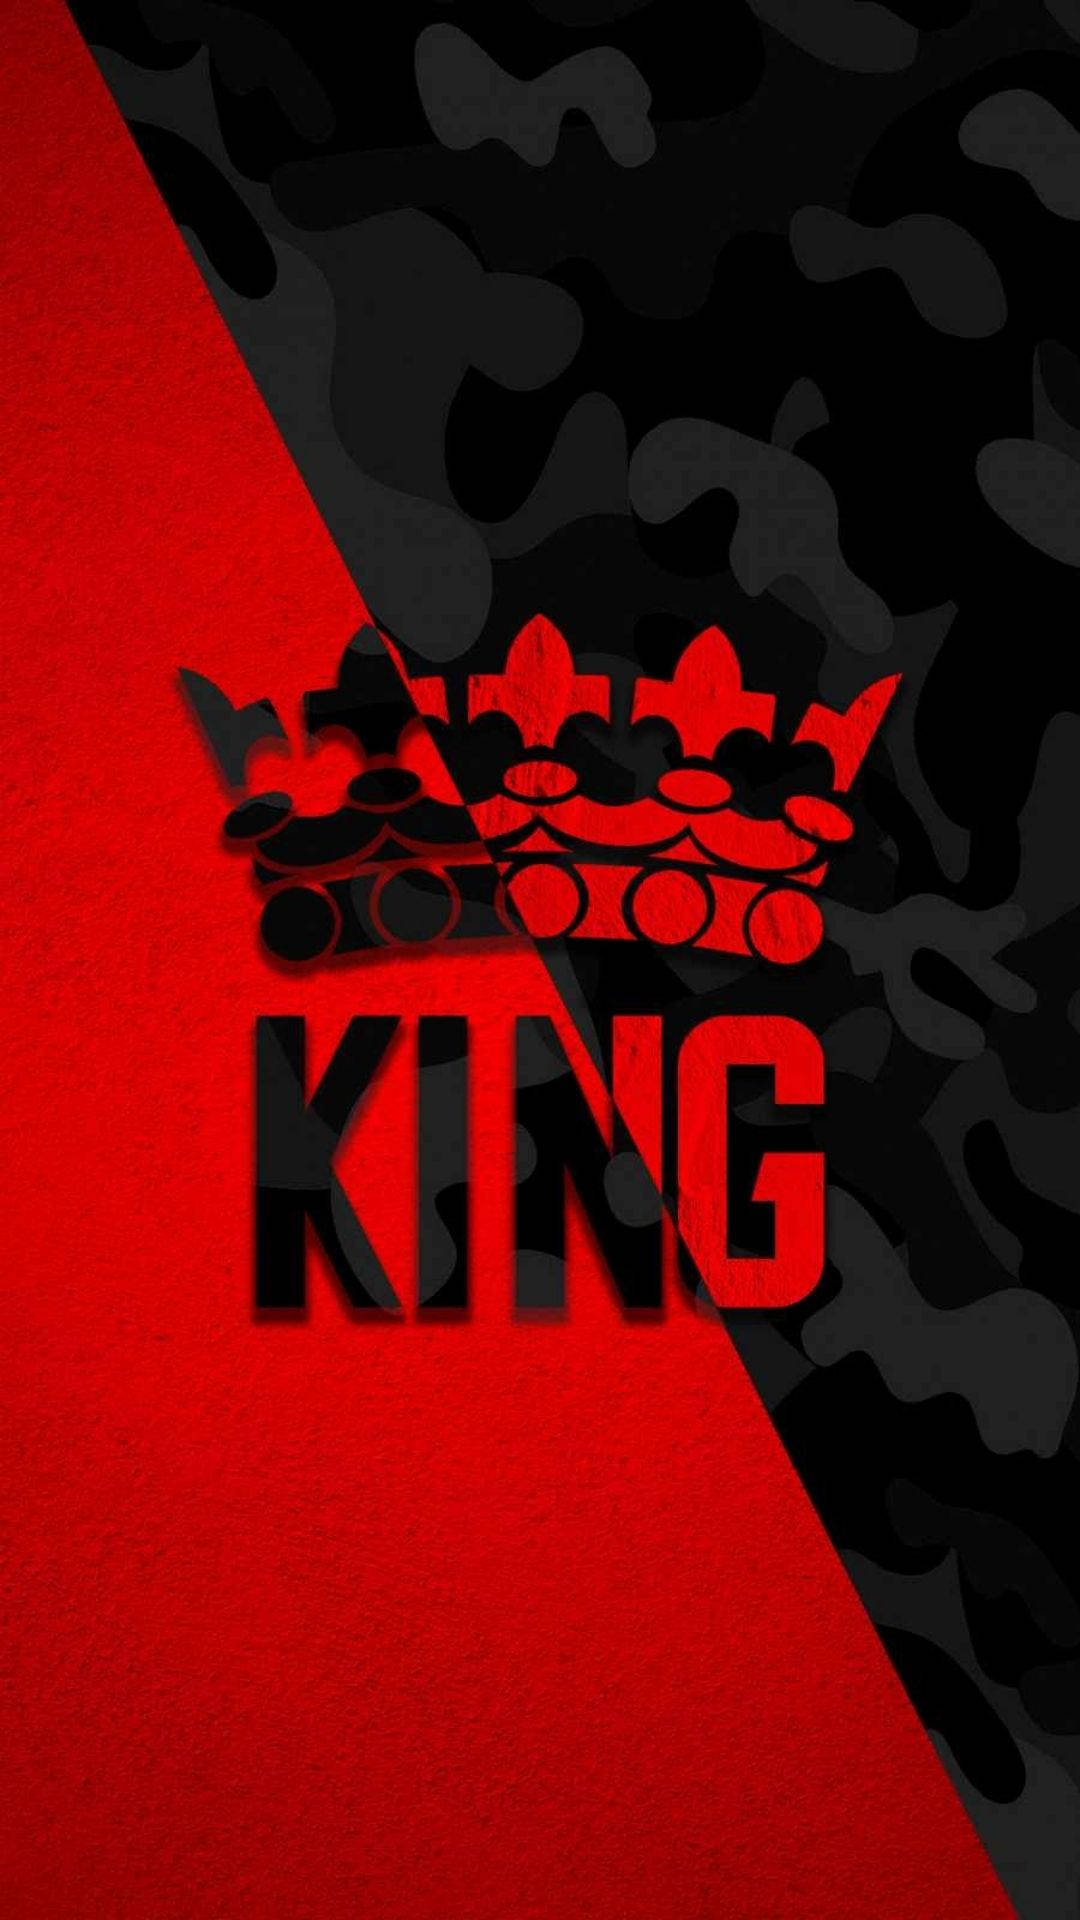 Download KING Wallpaper by UfukTM  3f  Free on ZEDGE now Browse  millions of popular king Wallpapers and Ring  Glitch wallpaper Neon  wallpaper Hype wallpaper